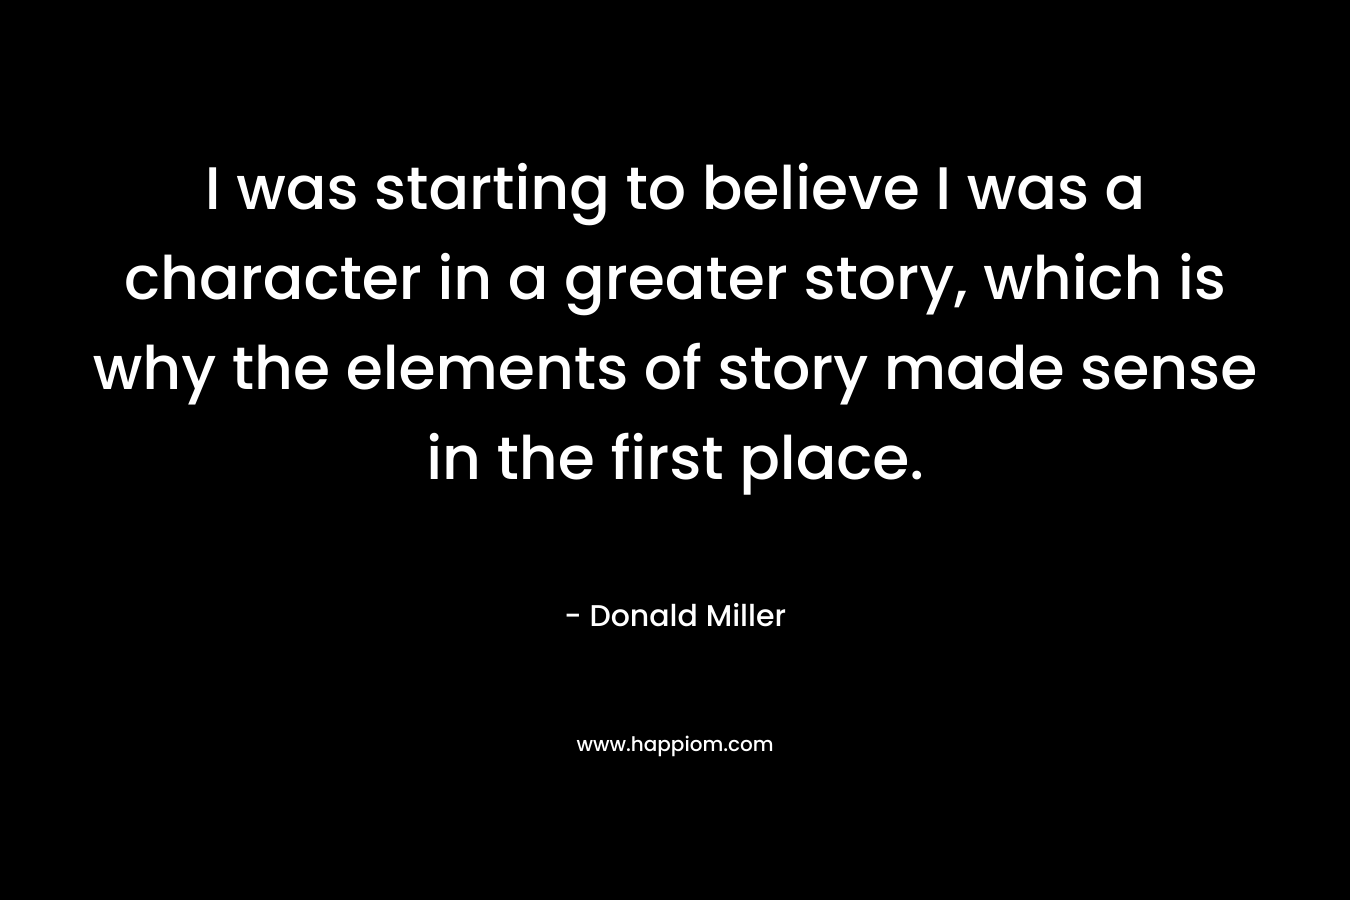 I was starting to believe I was a character in a greater story, which is why the elements of story made sense in the first place. – Donald Miller